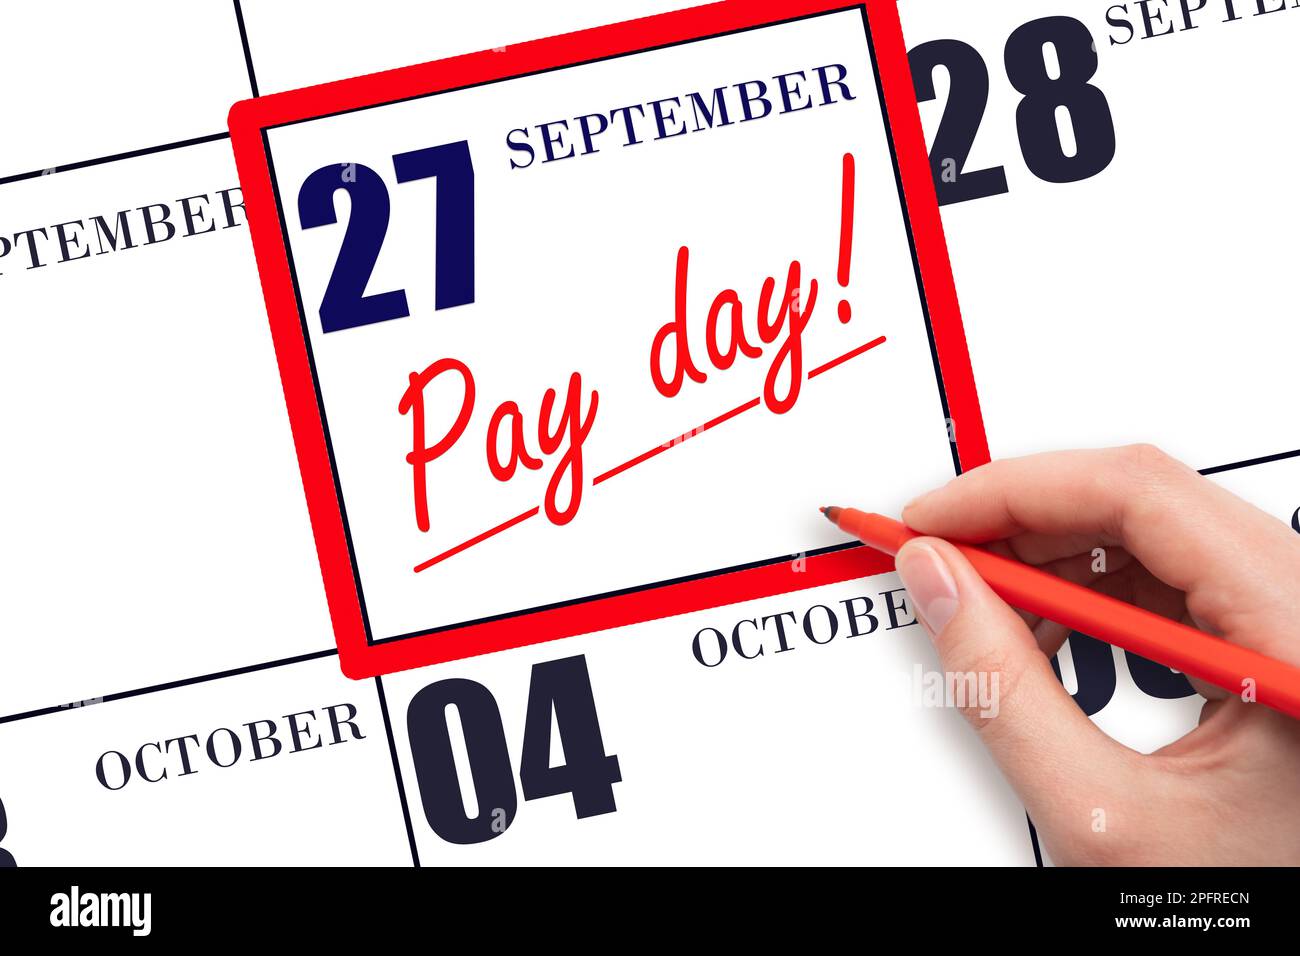 27th day of September. Hand writing text PAY DATE on calendar date September  27 and underline it. Payment due date.  Reminder concept of payment. Aut Stock Photo